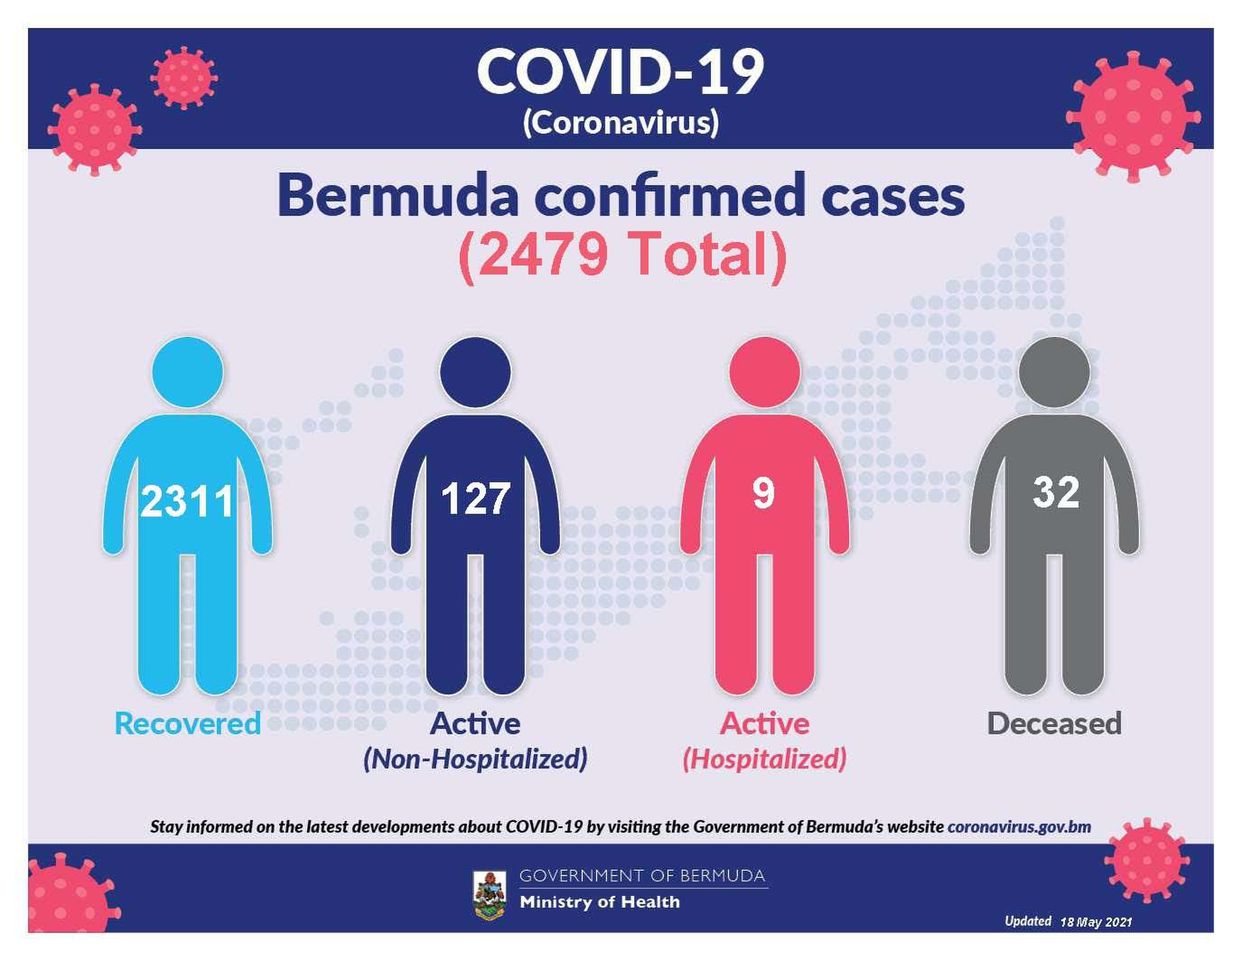 Health Minister reports 2 new COVID-19 cases in Bermuda, 18 May 2021